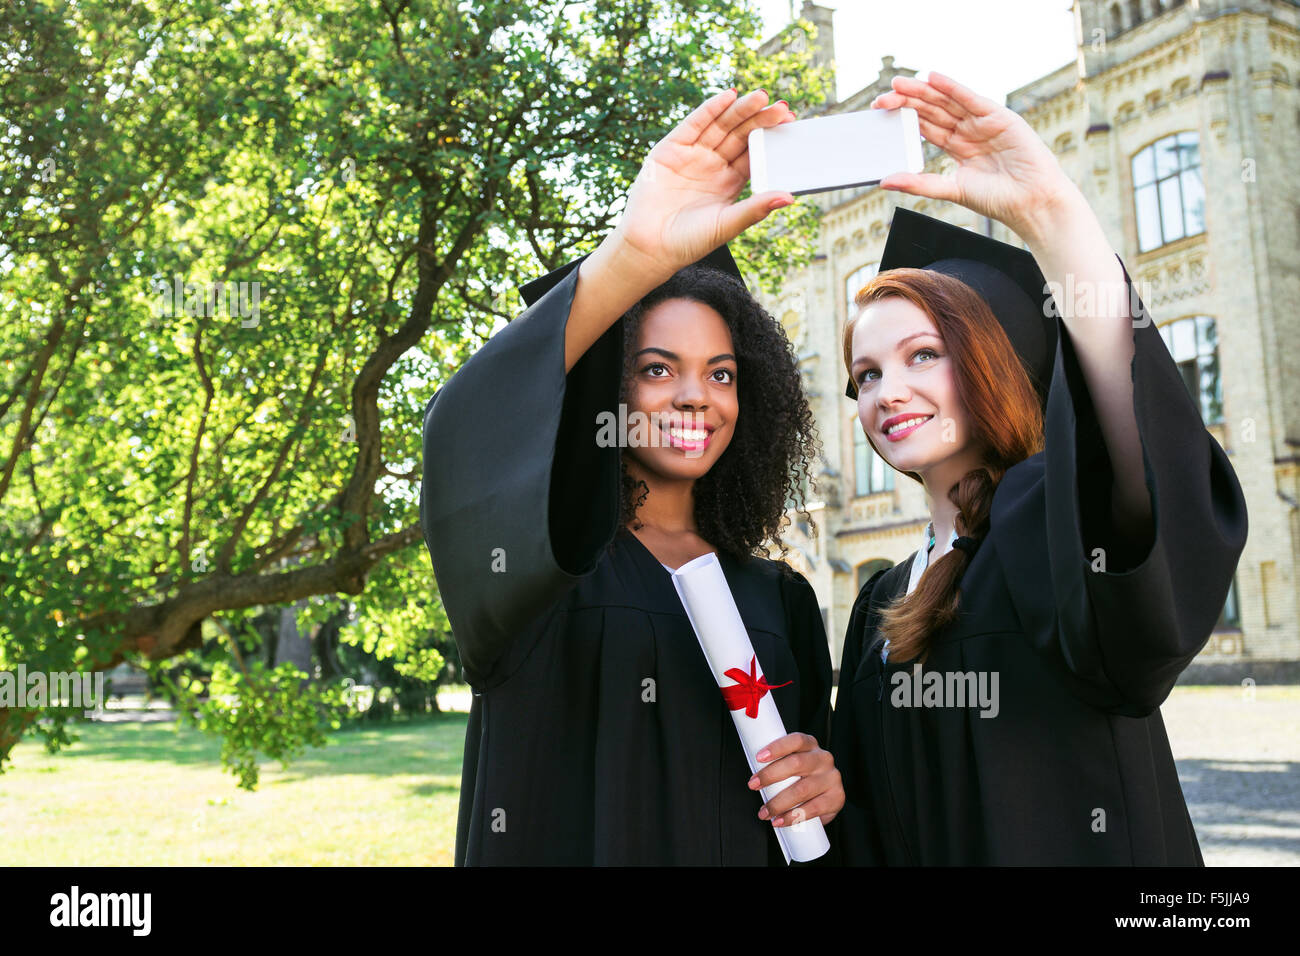 Concept for student graduation day Stock Photo